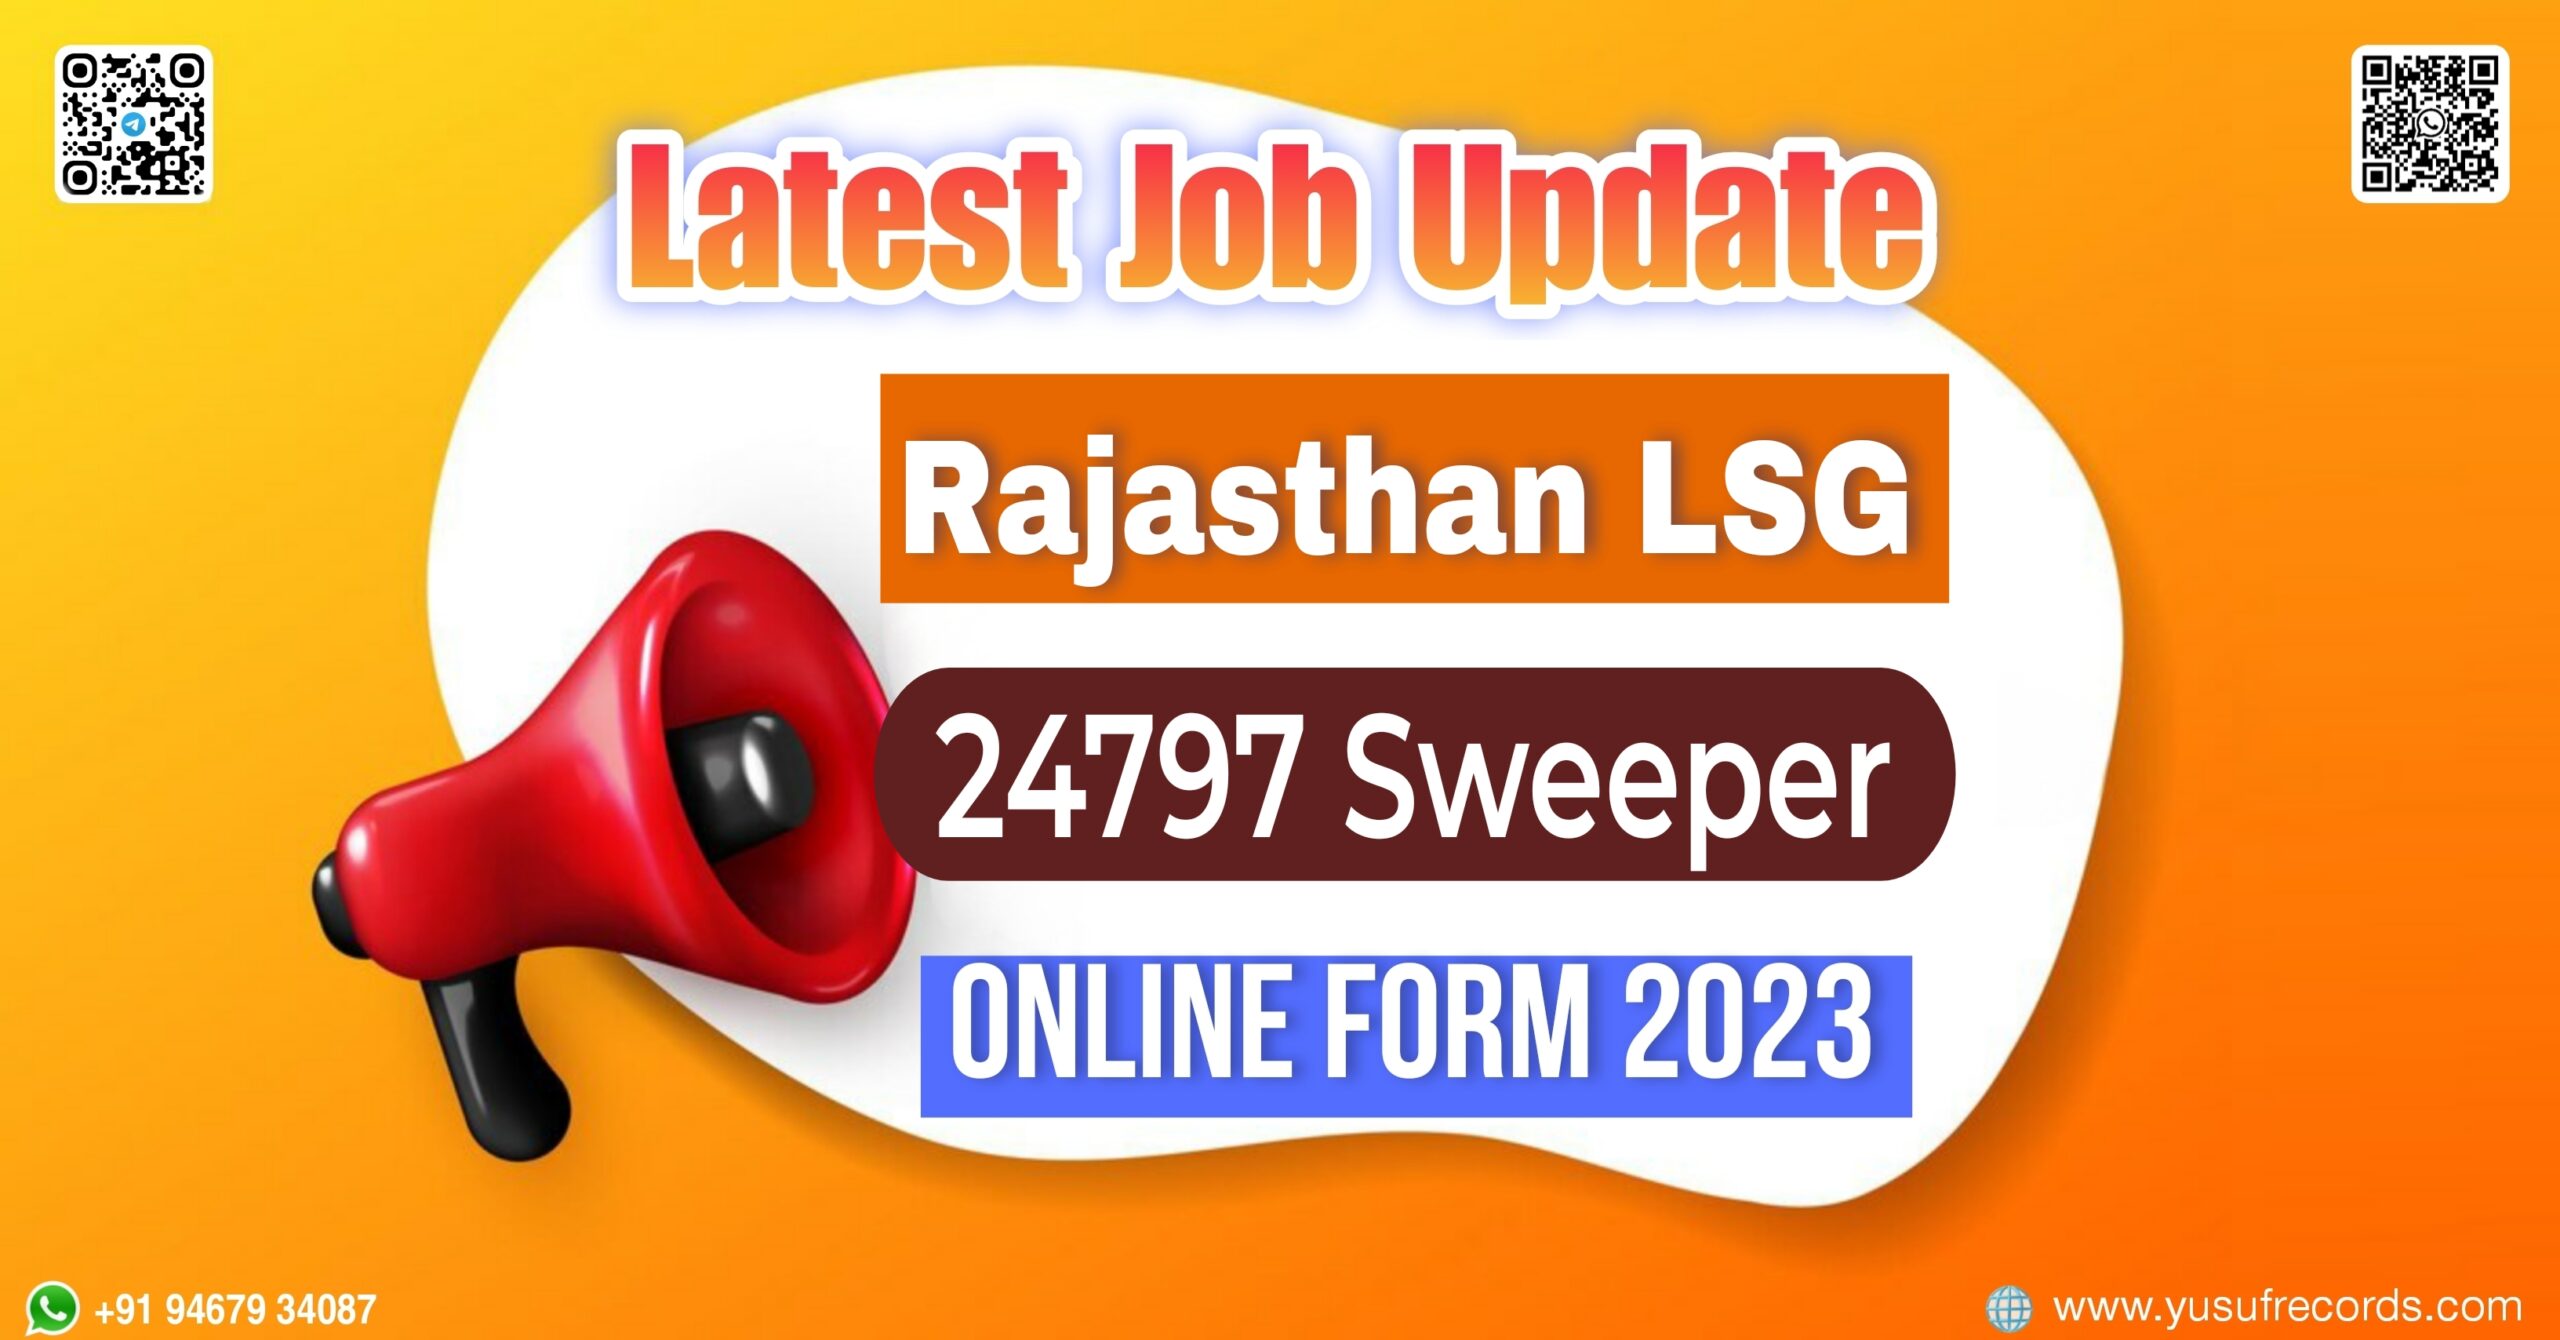 Rajasthan LSG 24797 Sweeper Online Form yusufrecords latest jobs updates